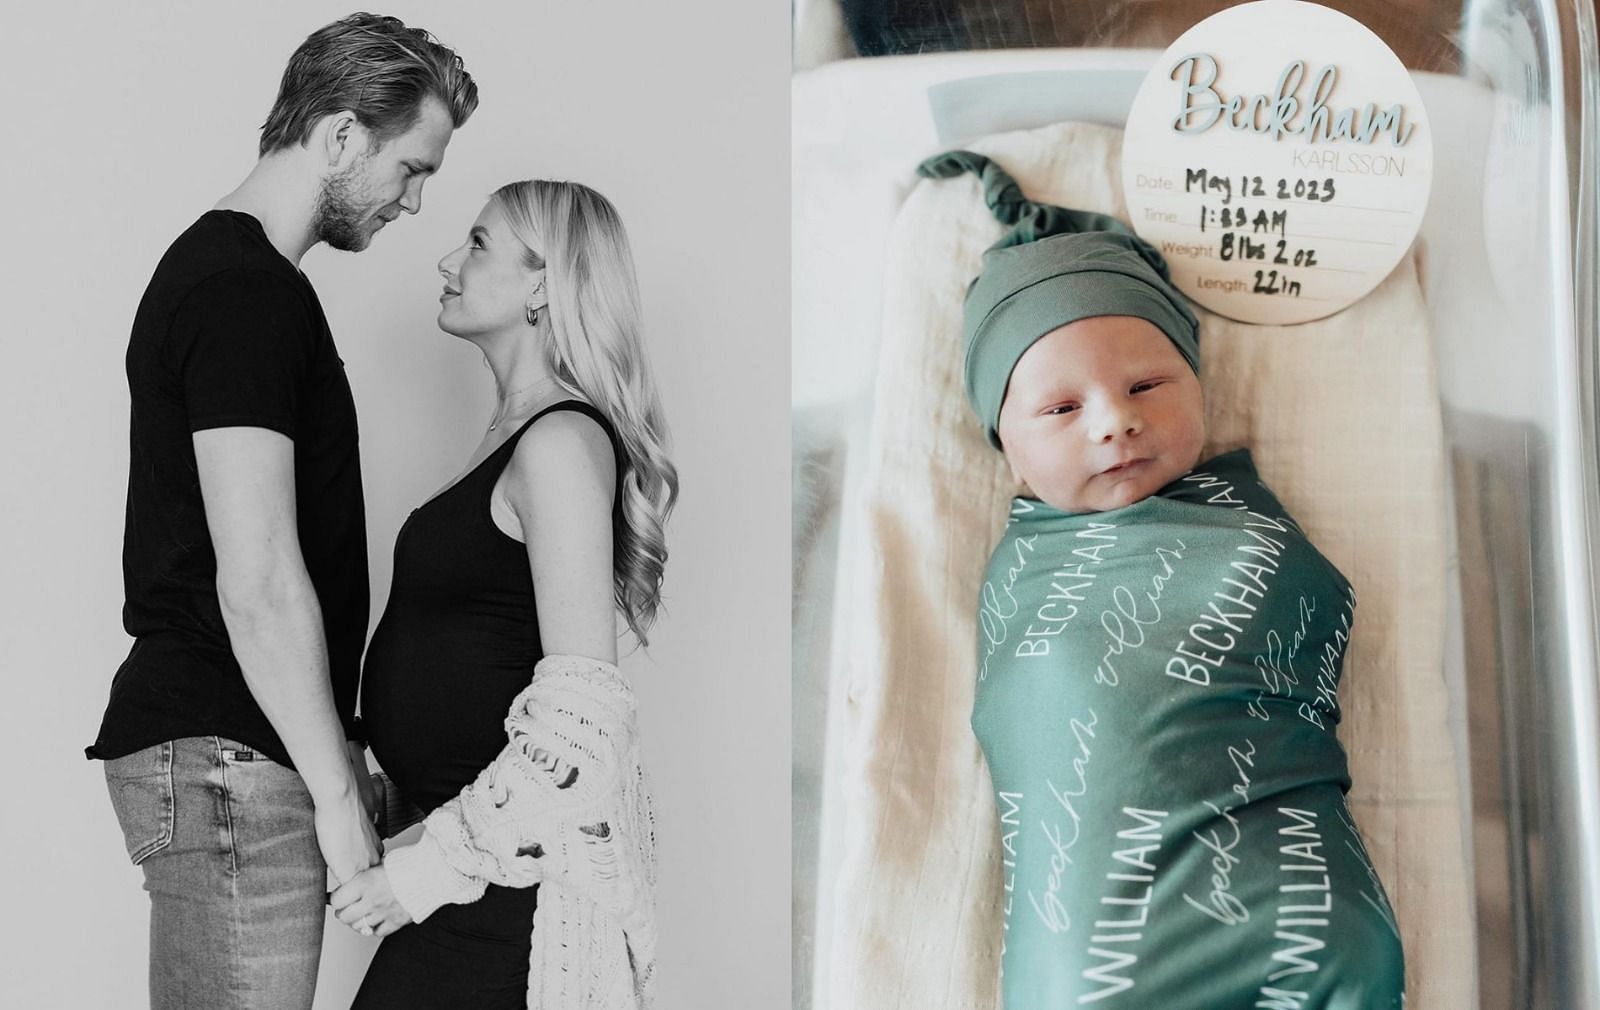 William Karlsson and wife Emily welcomed their son Beckham, just before Game 5 against Oilers